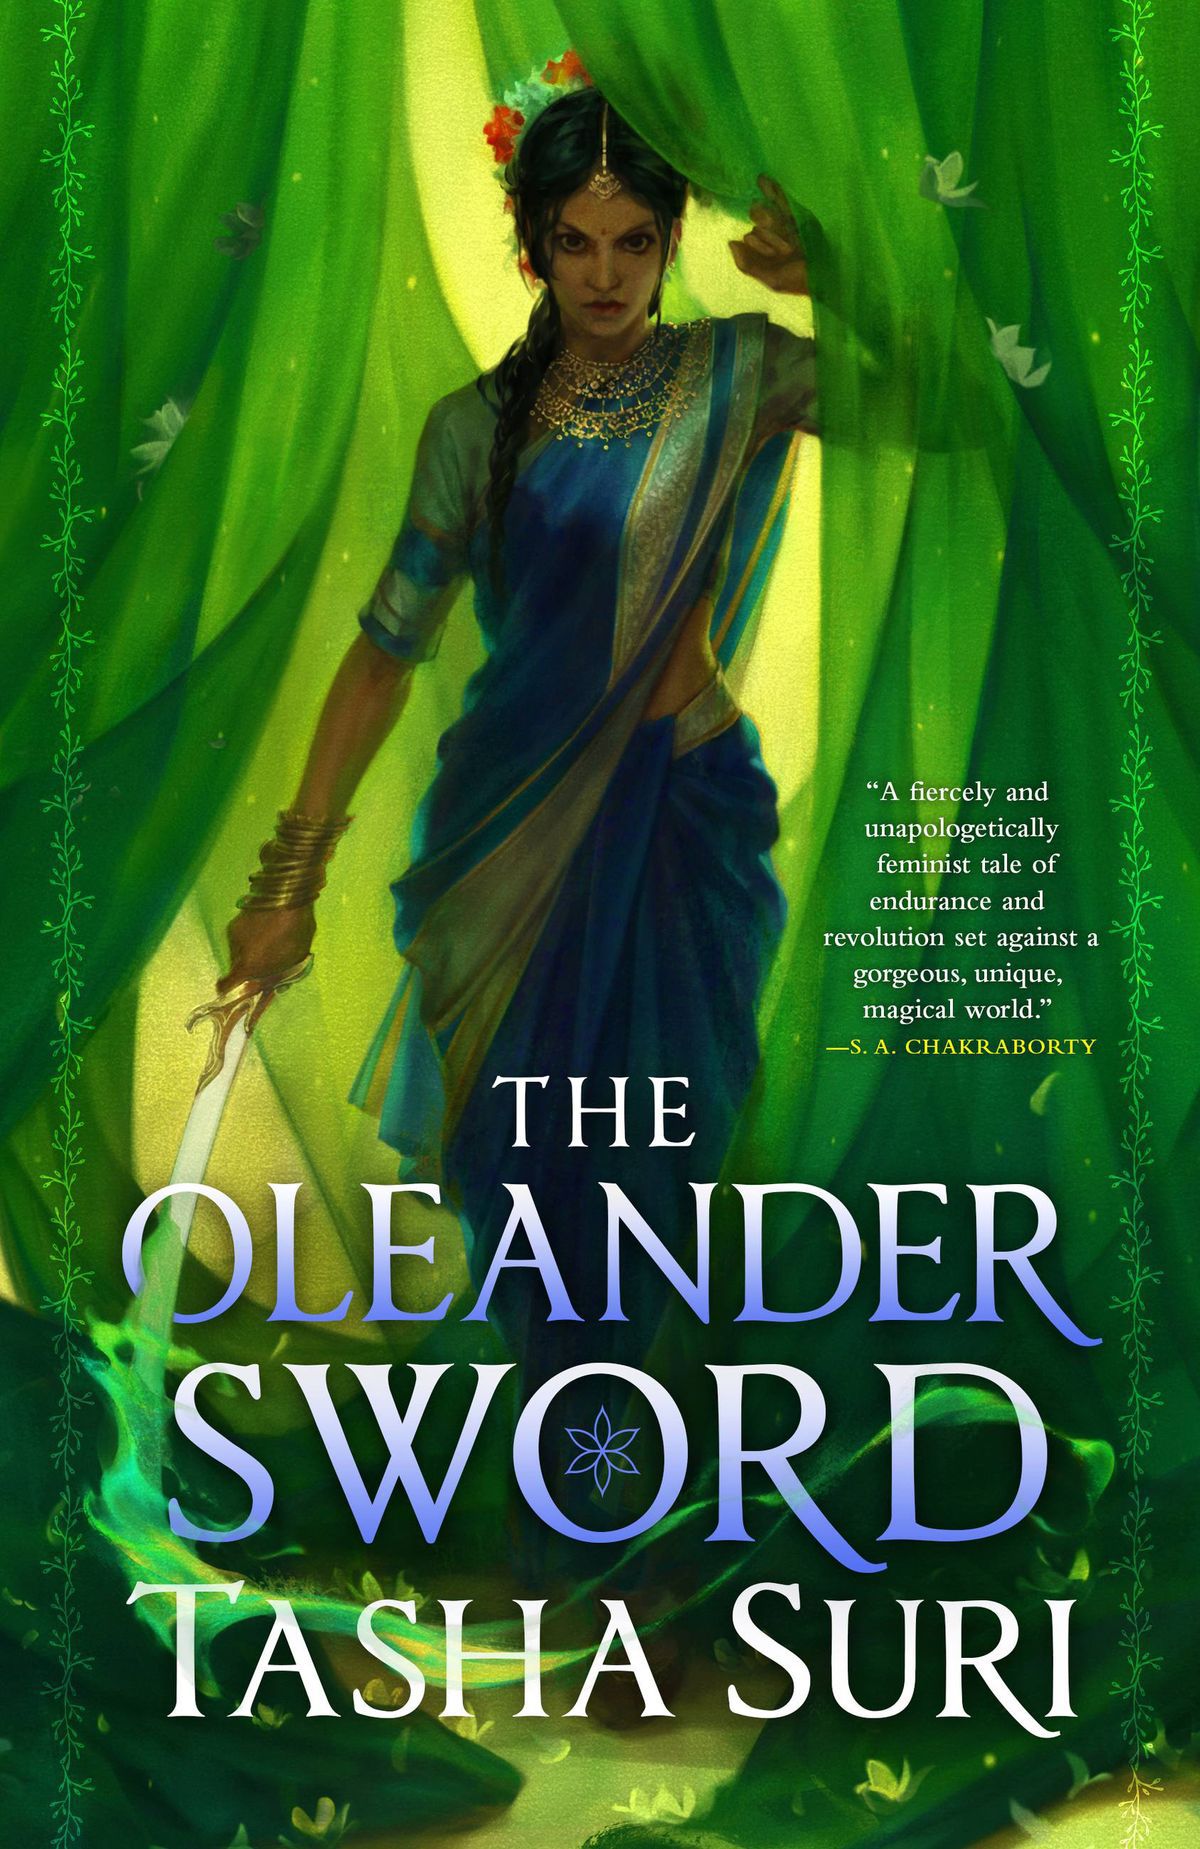 The cover of The Oleander Sword showing a woman standing between curtains of green fabric